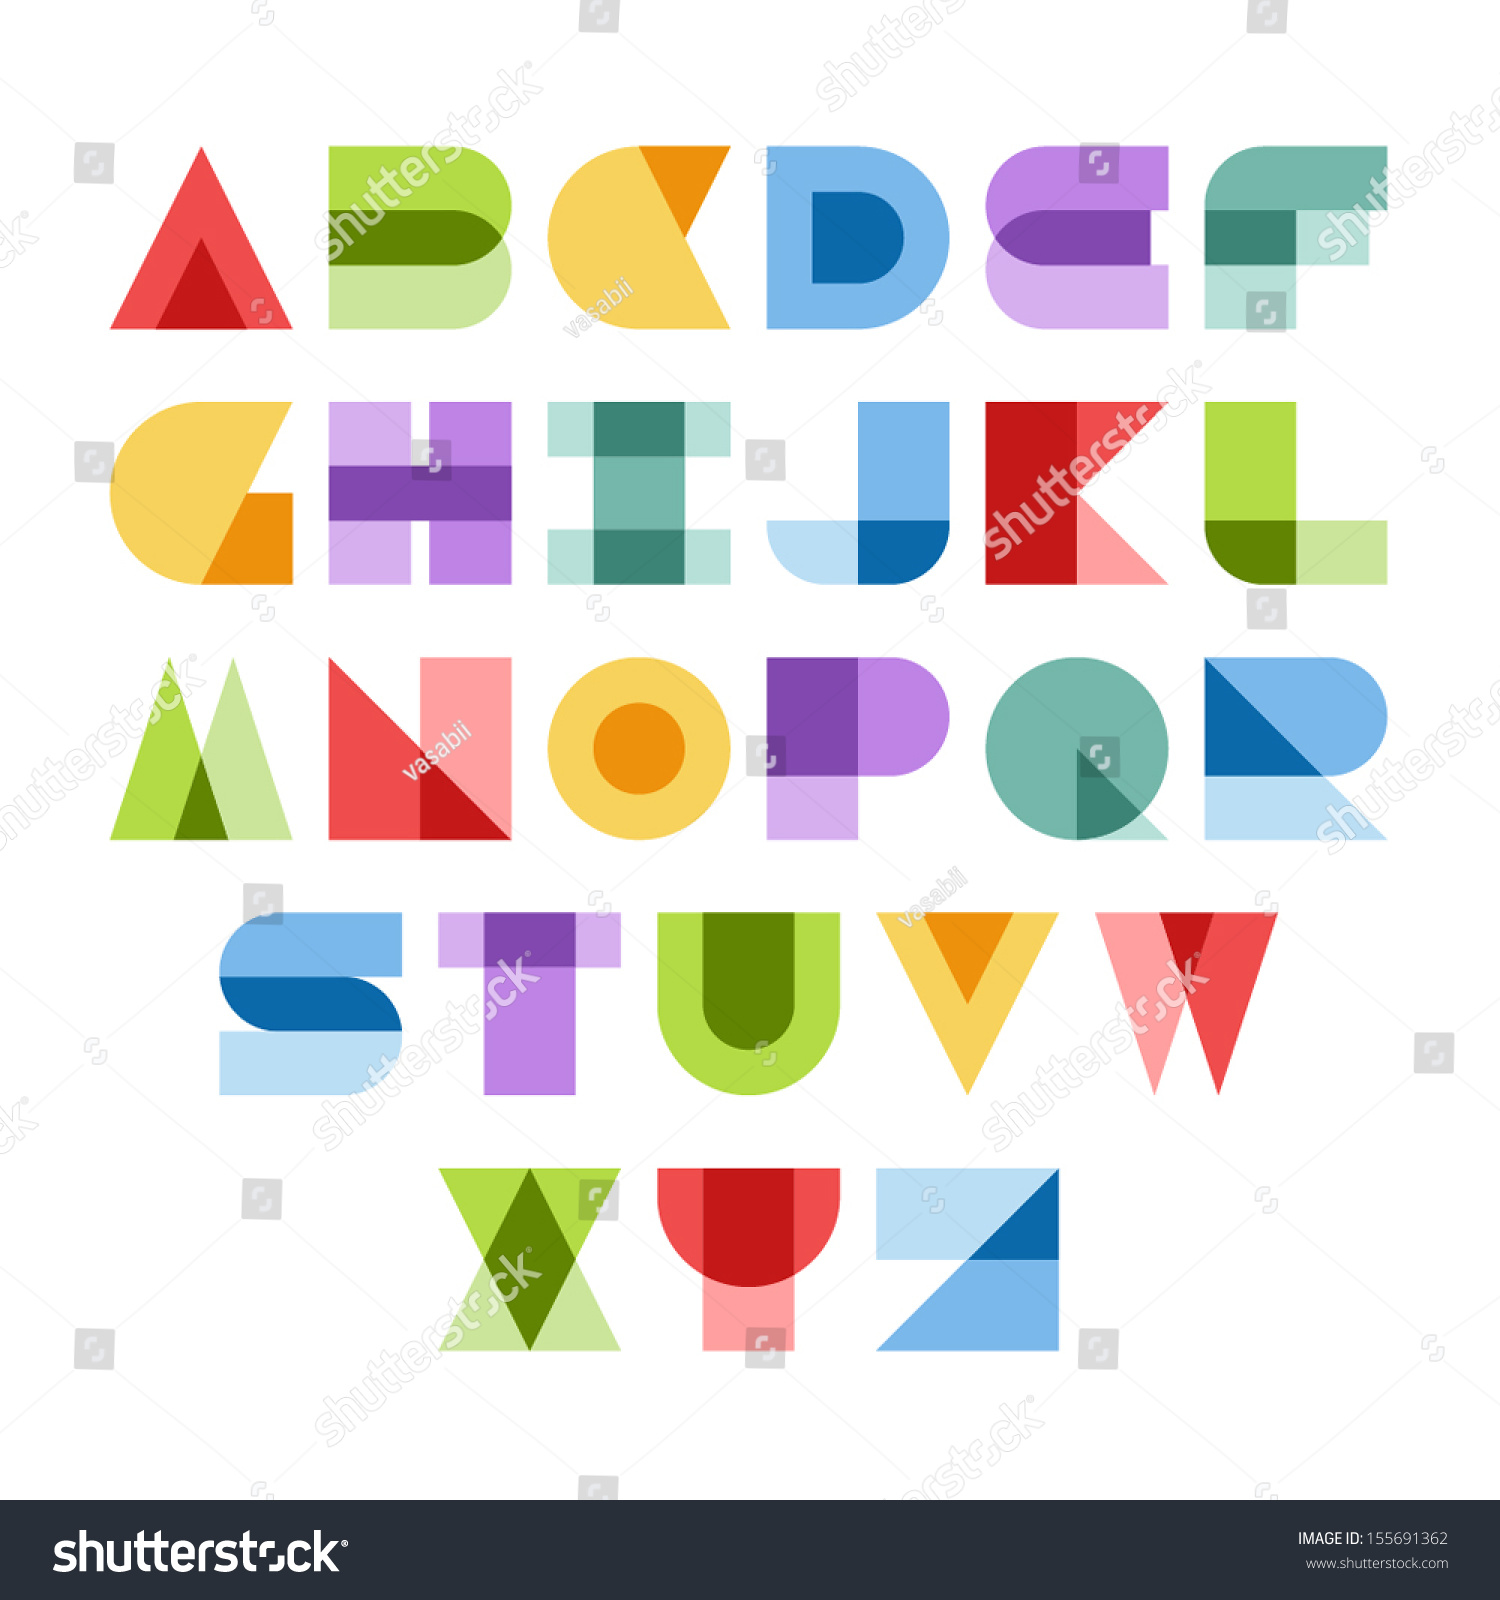 Design Elements. Vector Illustration Of Colorful Abstract Letters ...